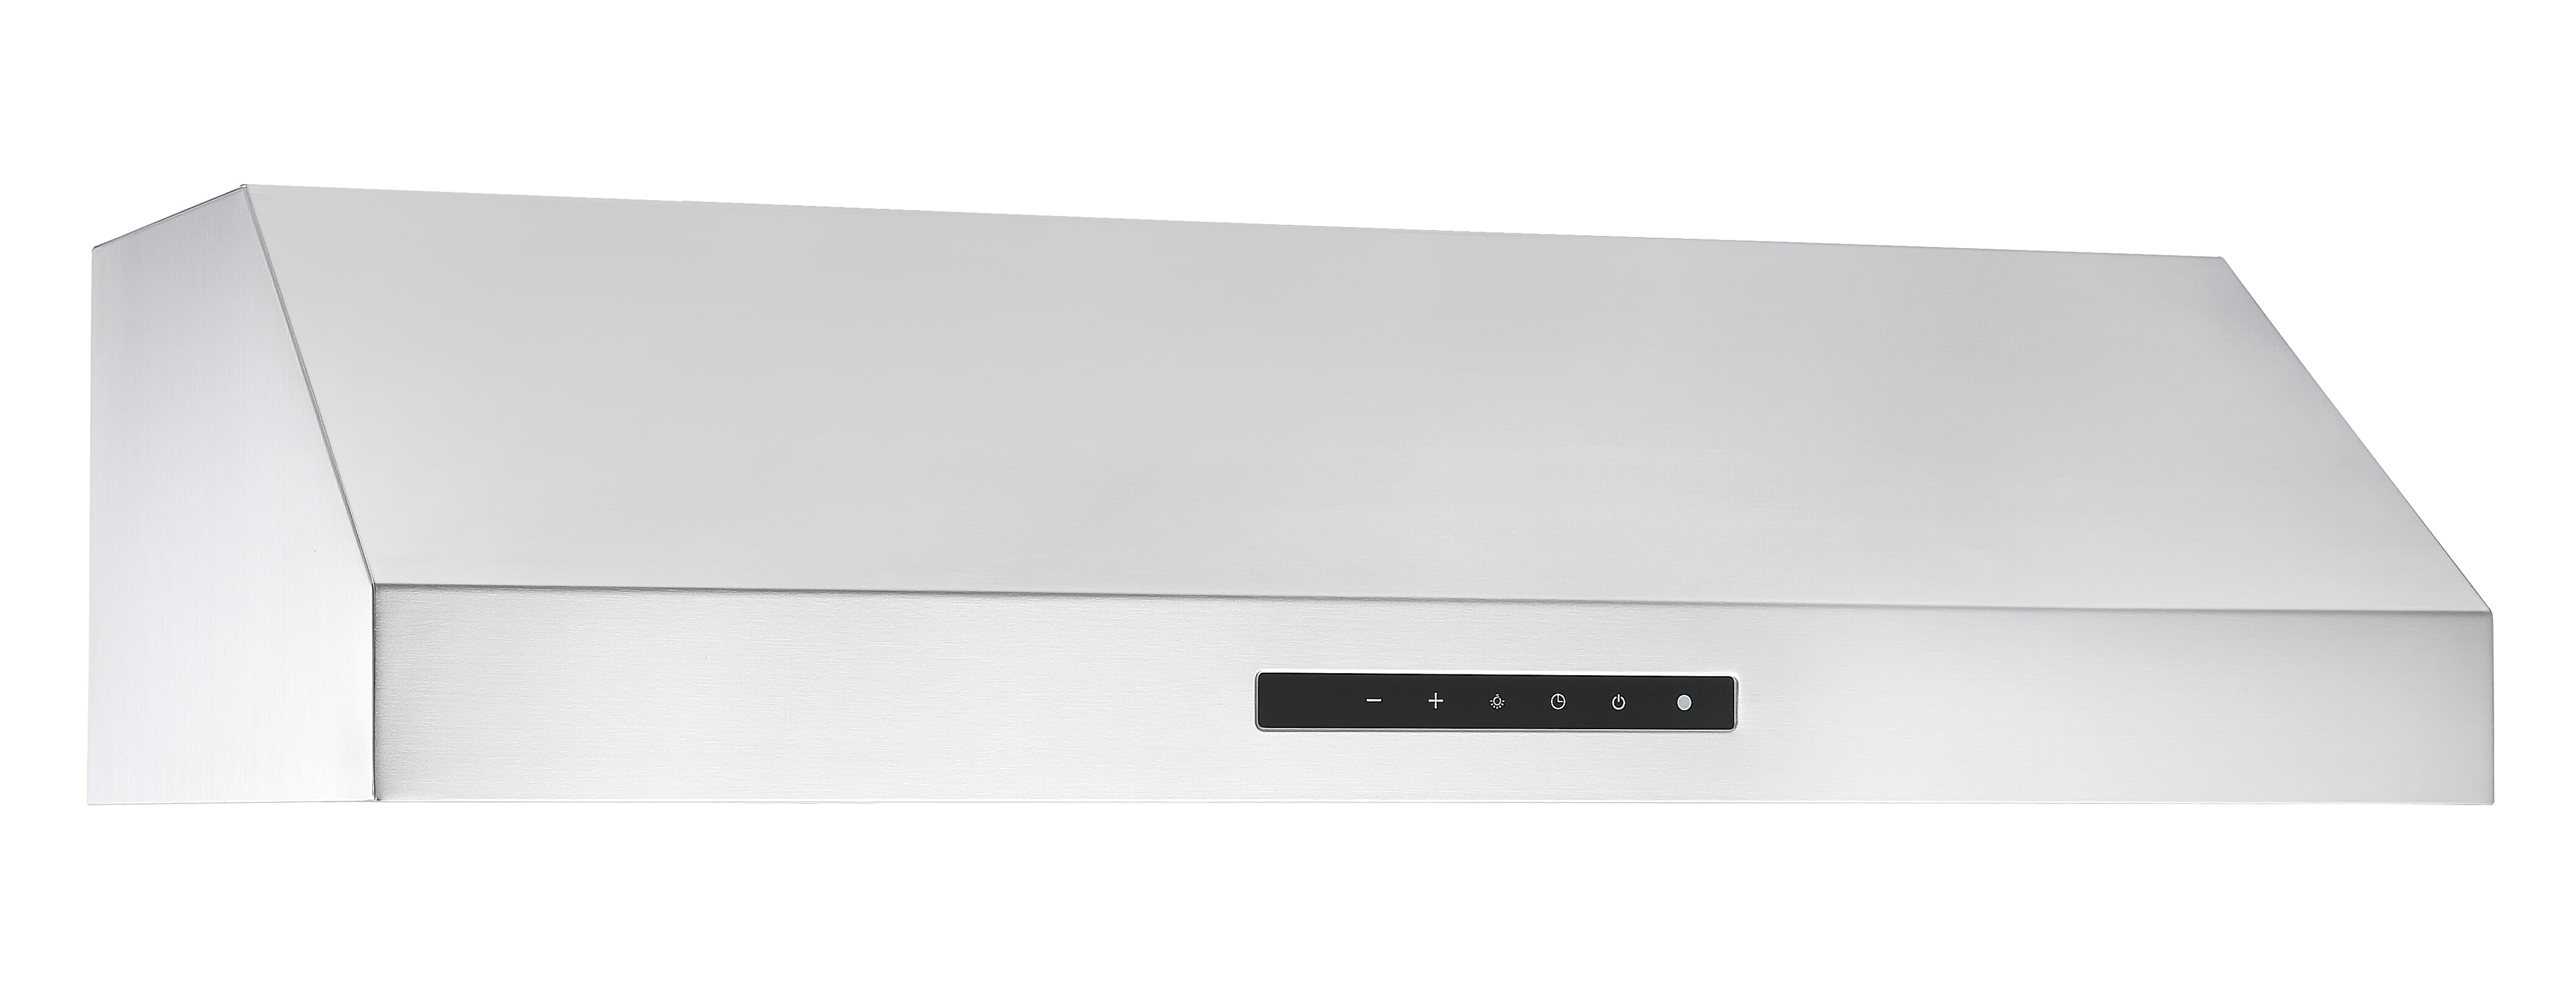 36 in. UCT636 Under Cabinet Range Hood with Night Light Feature